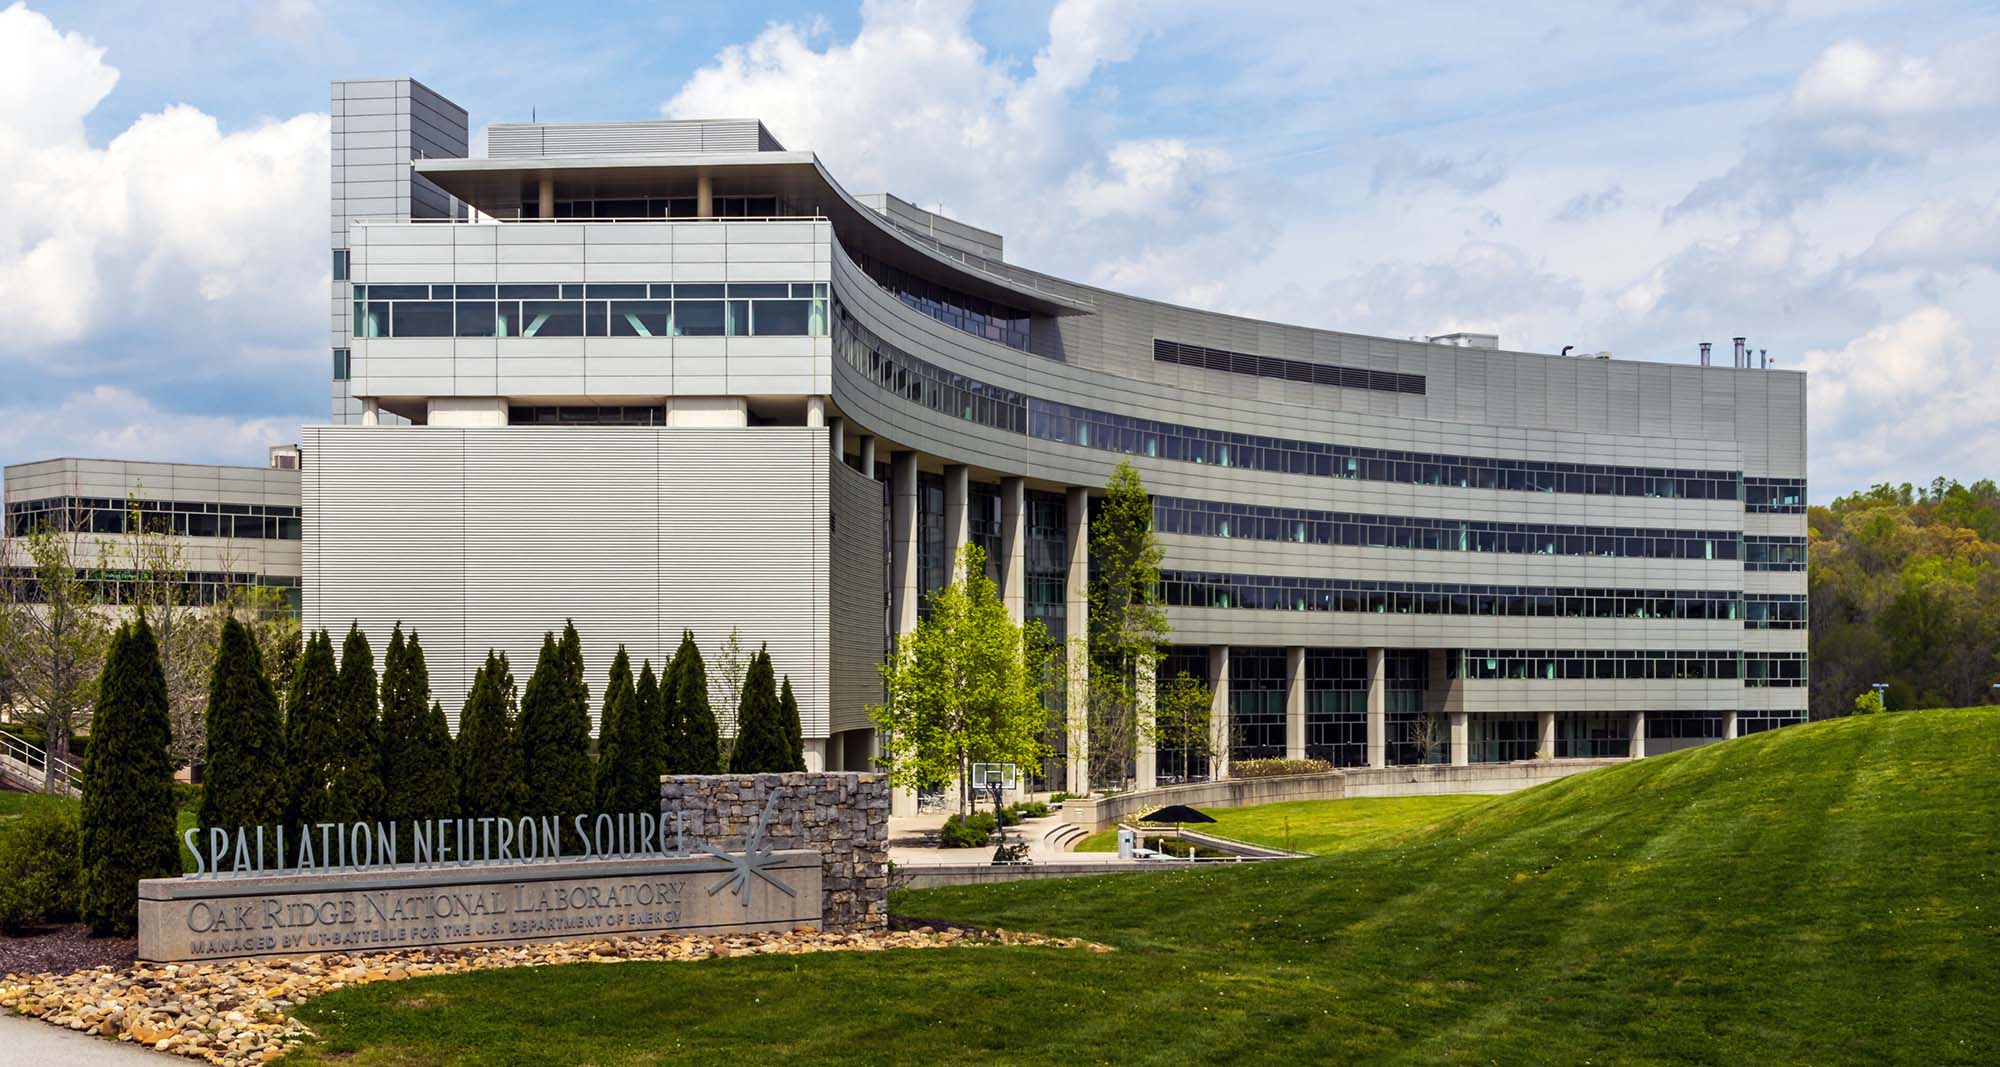 Exterior of the Spallation Neutron Source building at Oak Ridge National Laboratory.